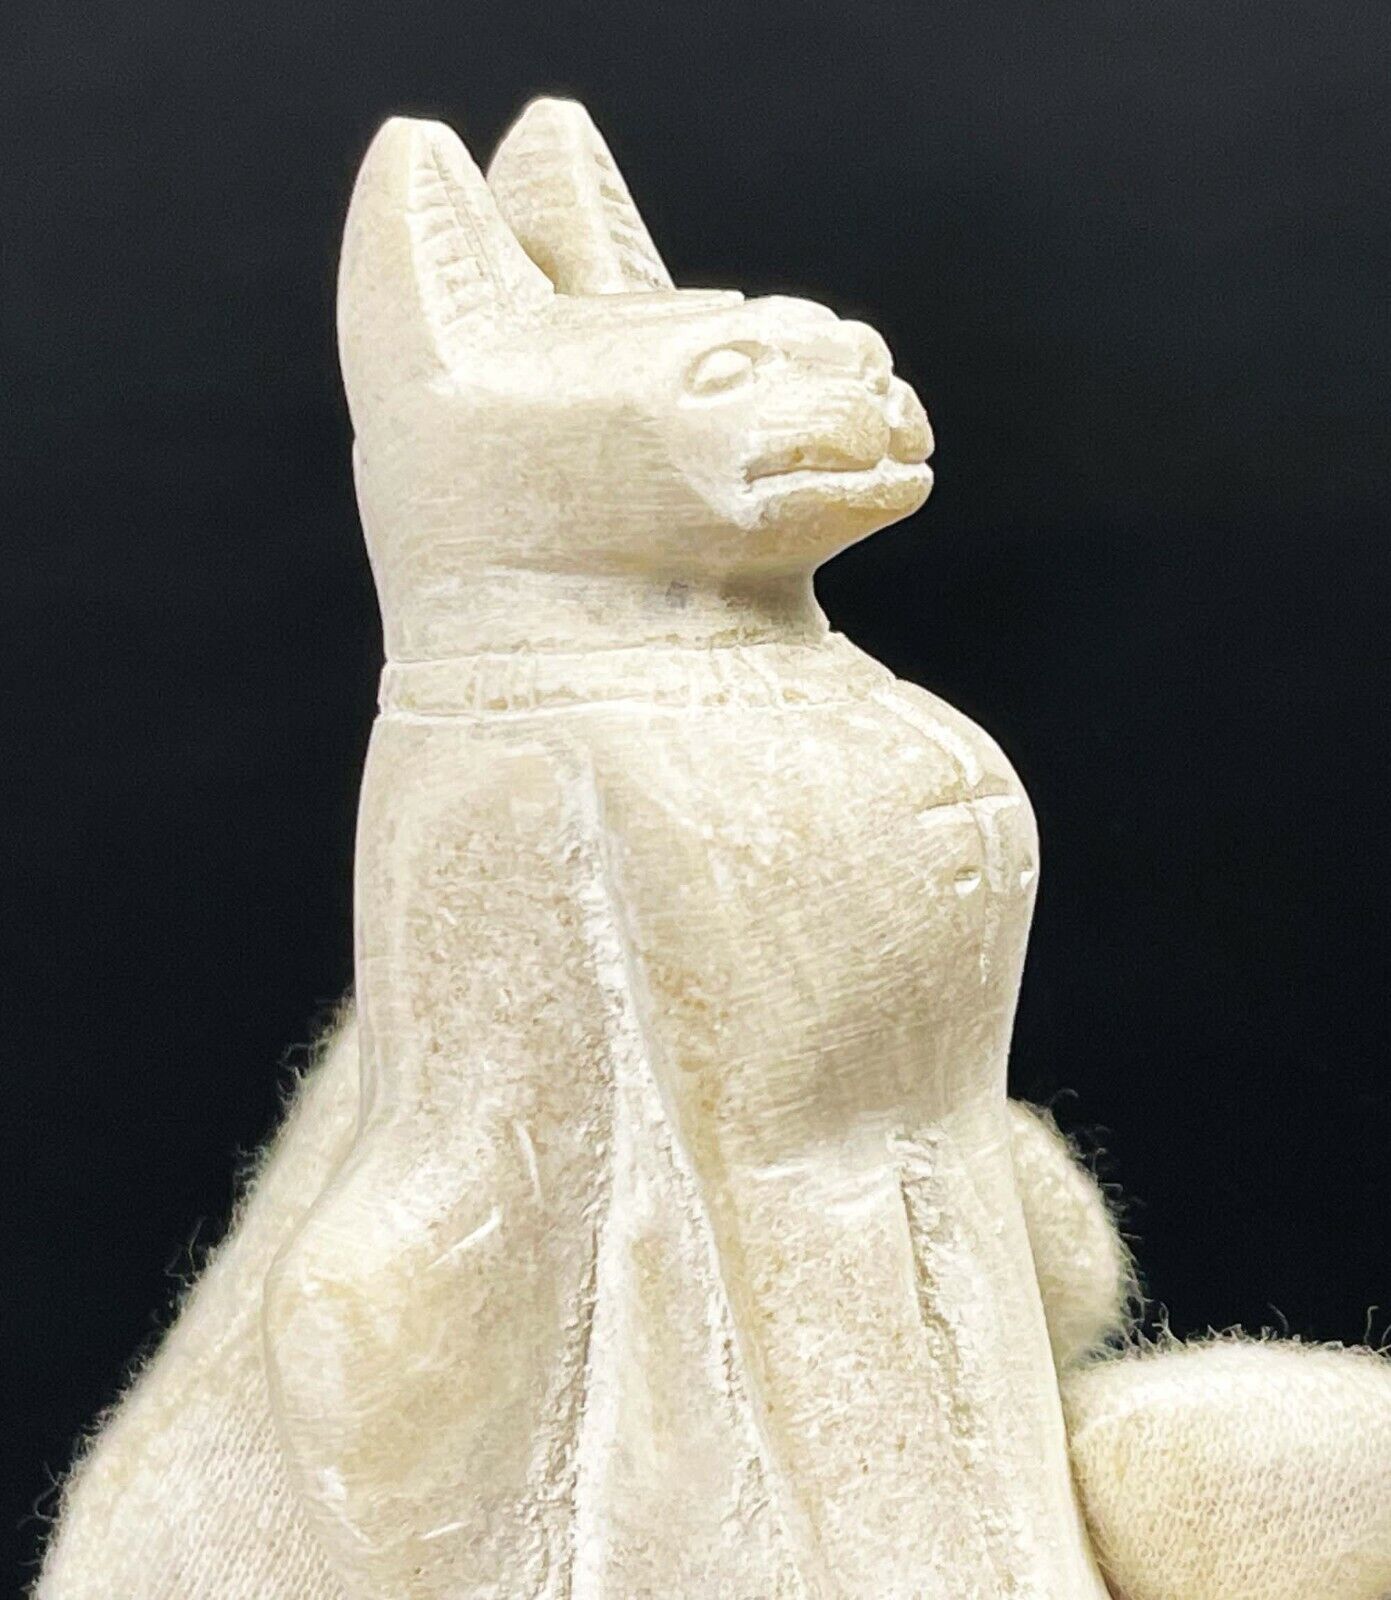 Very unique piece of BASTET GODDESS of protection